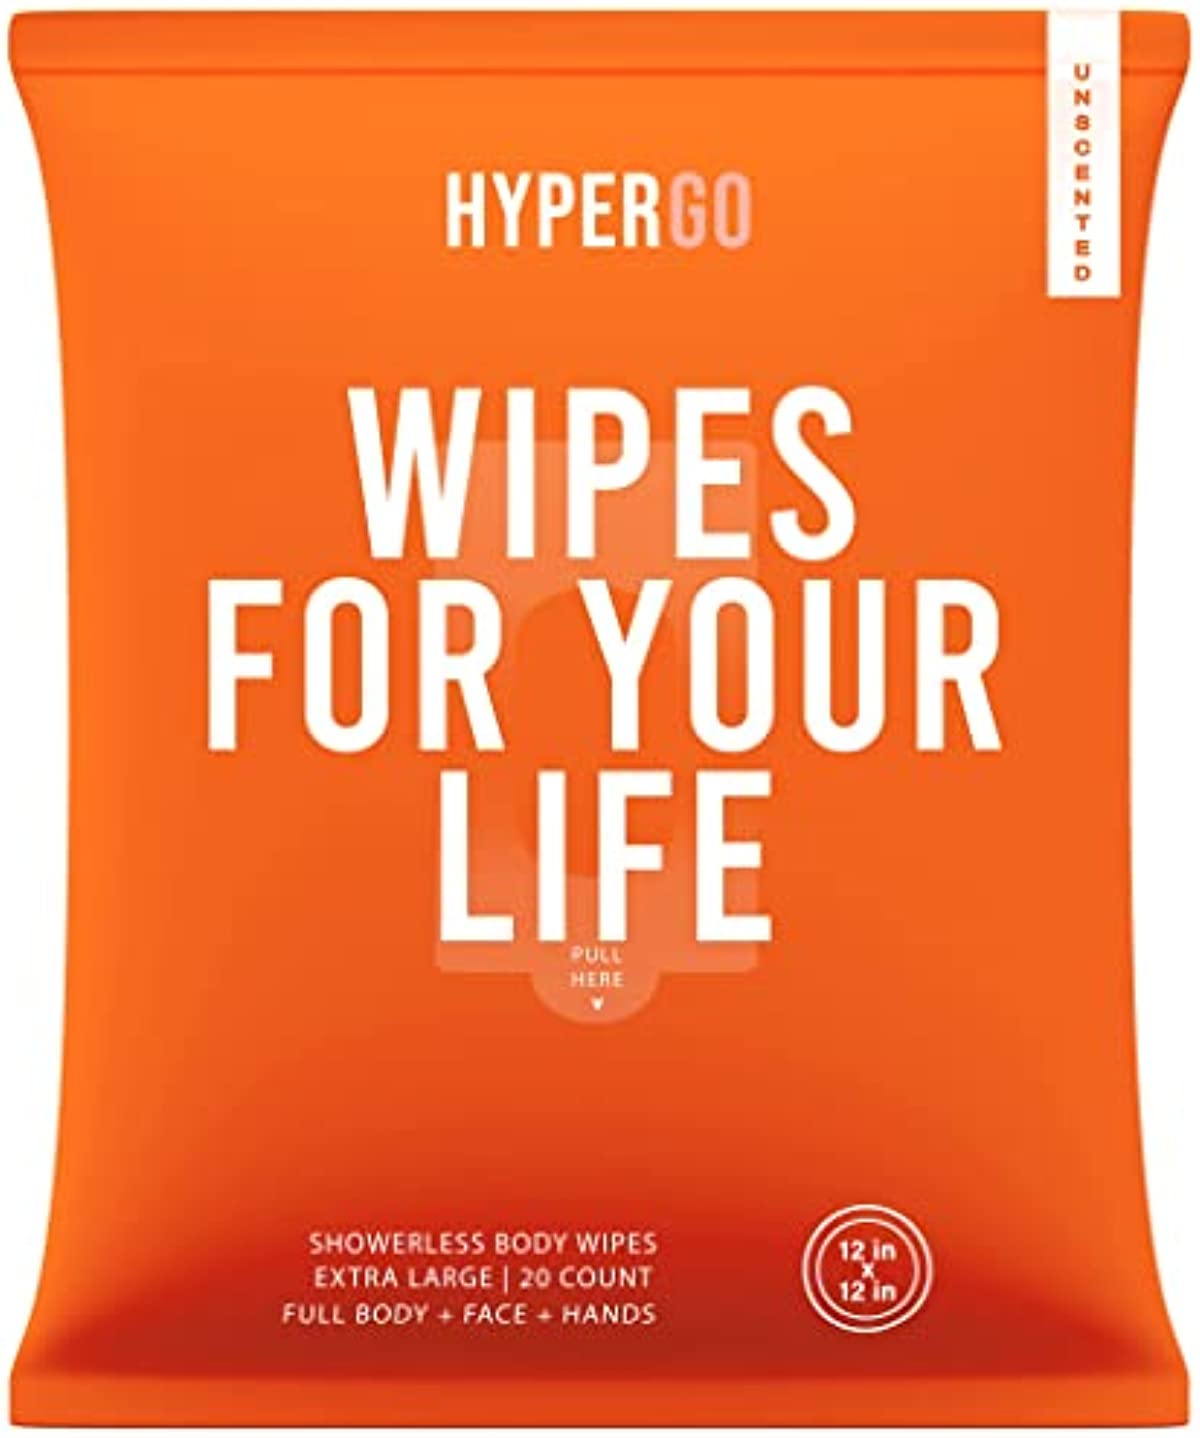 HyperGo Full-Body Rinse-Free Hypoallergenic Biodegradable Bathing Wipes –All Natural, Refreshing Anytime Anywhere, Post Workout, Camping, Travel, Daily Life, 12”x12” X-Large 20-count, Unscented 1 Pack